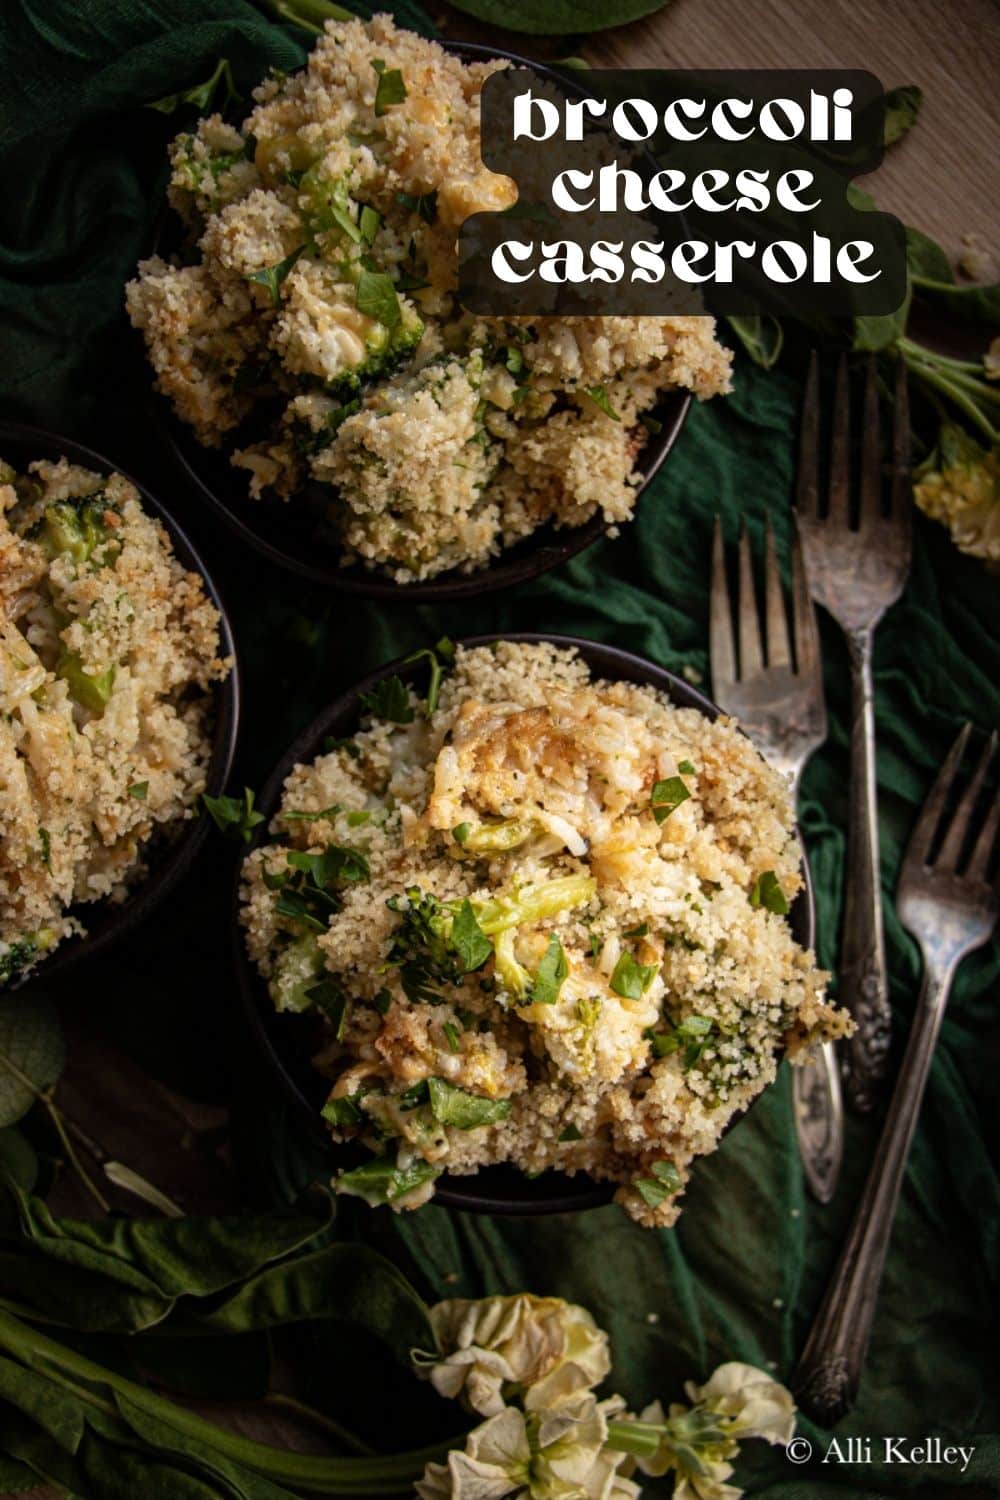 Broccoli rice casserole is a simple and delicious meal that'll be a hit in any household! Bursting with flavor from the garlic, cream of chicken soup, broccoli florets, and sharp cheddar cheese – this will be your new go-to family-friendly recipe. The best part? It's easy to make and cooks in just 40 minutes!